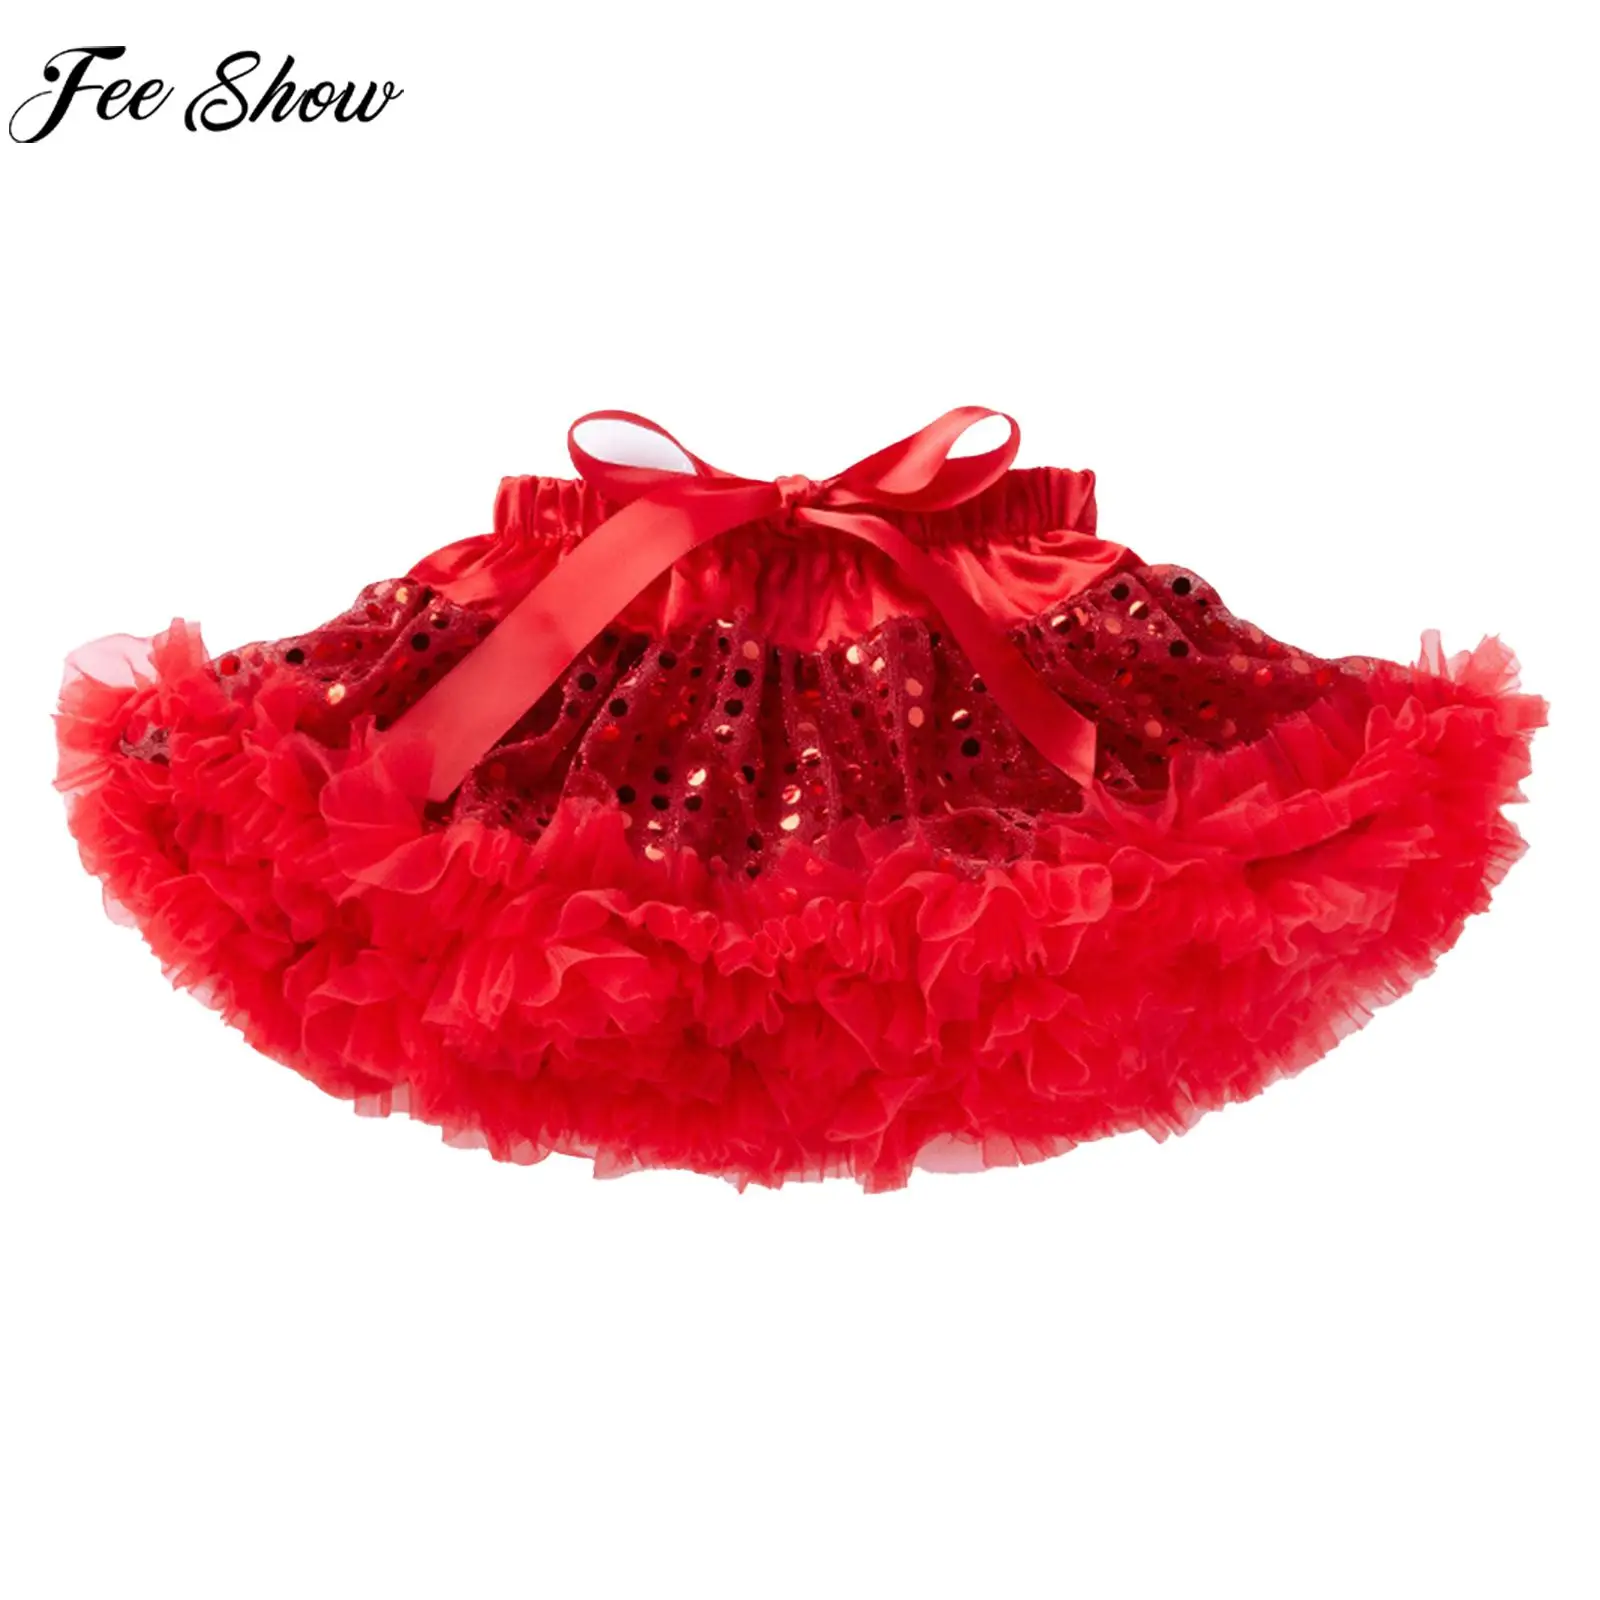 

Baby Cute Shiny Sequin Mesh Tutu Infant Girls Bowknot Tiered Cake Princess Skirt Christening Birthday Party Photography Costume